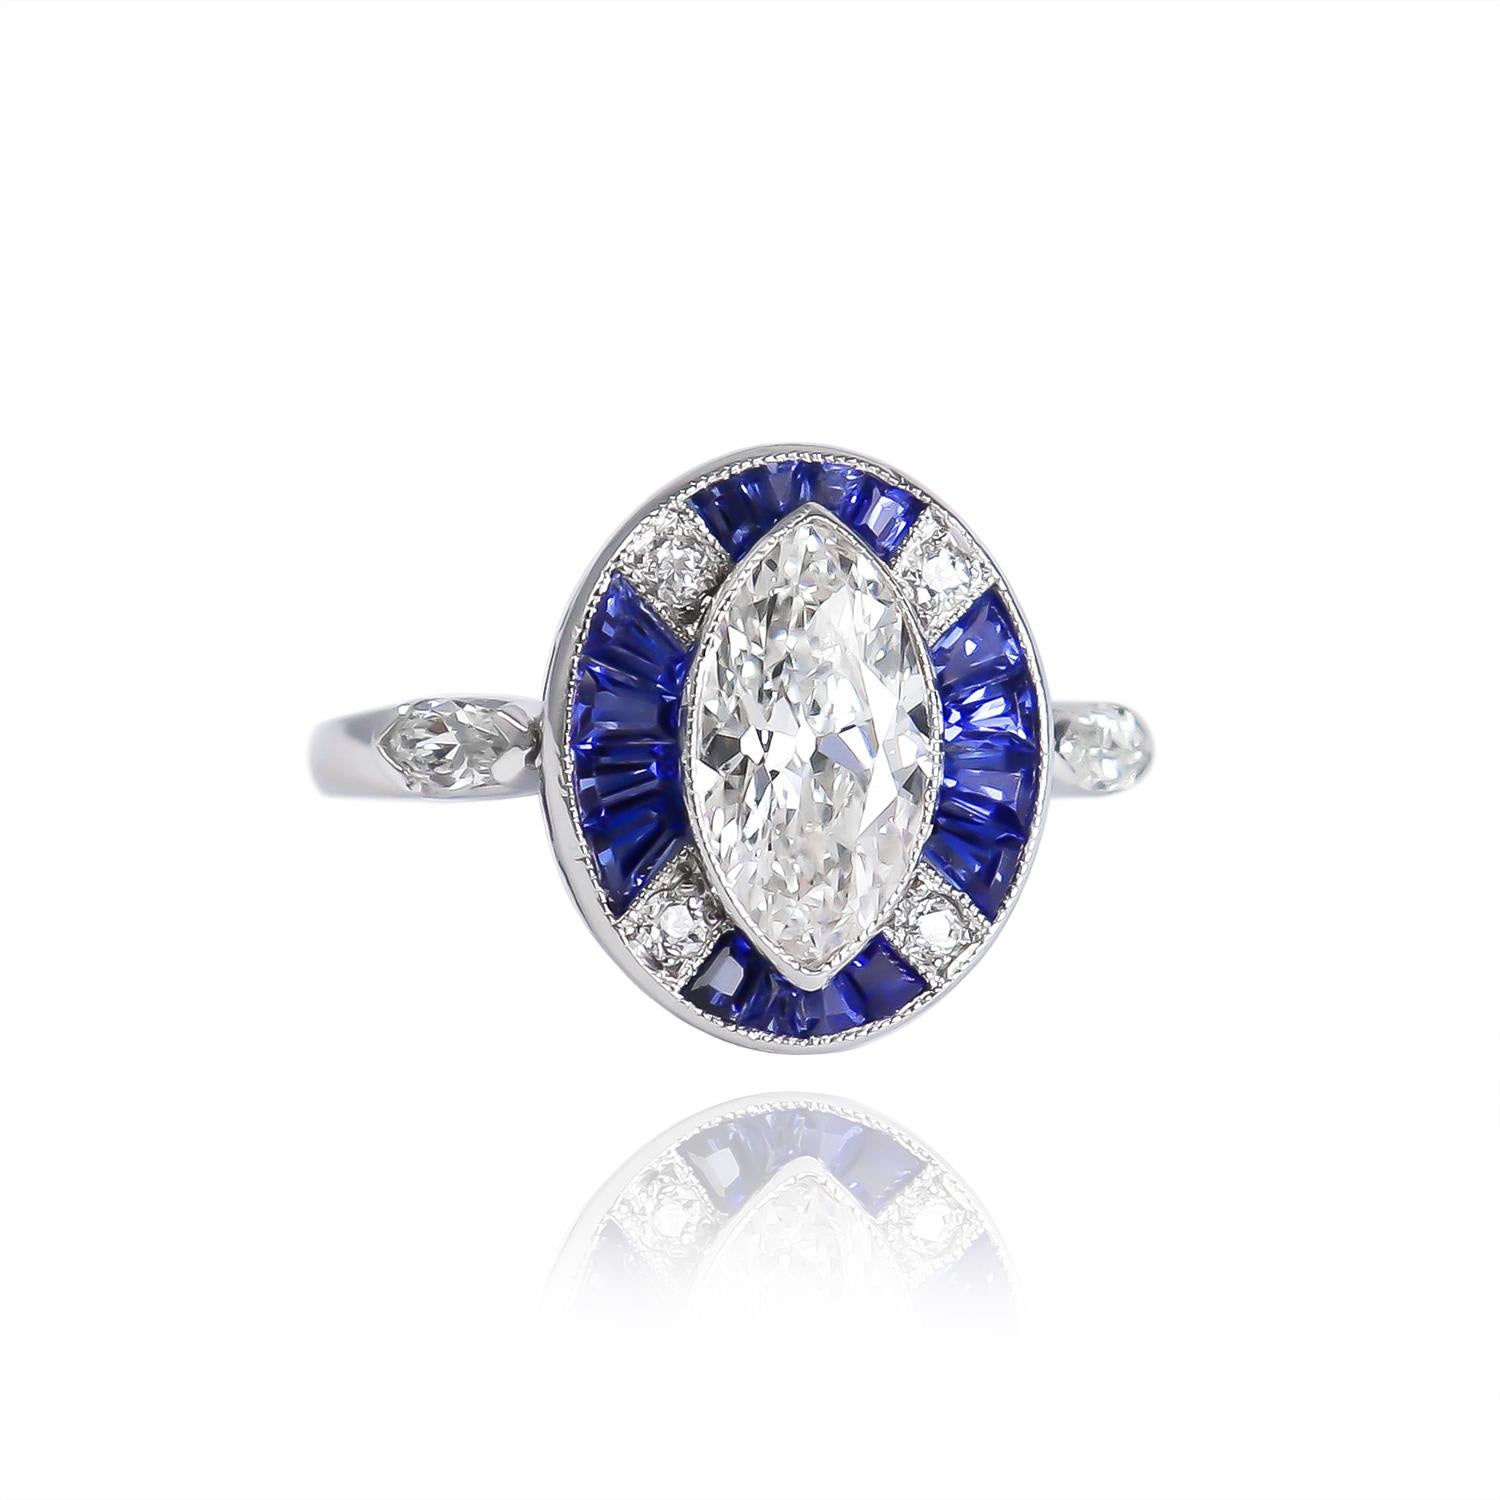 This exquisite piece new to the J. Birnbach vault features a 1.20 carat modified marquise brilliant cut diamond of E color and SI1 clarity. Set in its original, handmade, platinum ring mounting with a sapphire and diamond halo, this piece is a